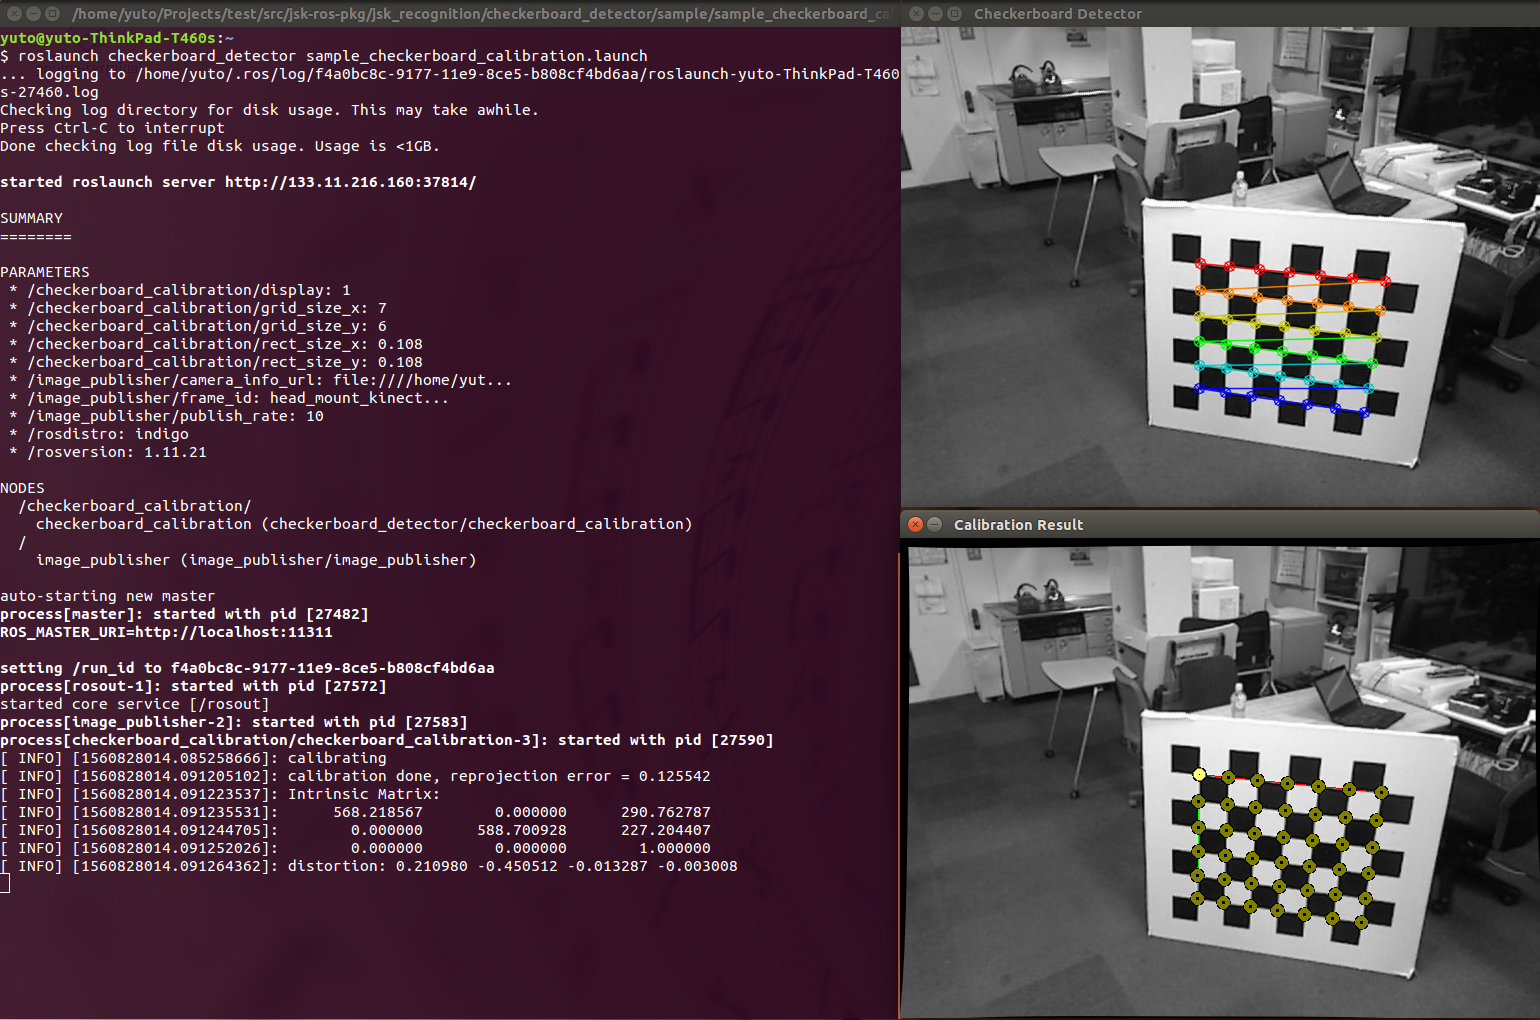 ../../_images/checkerboard_calibration.png